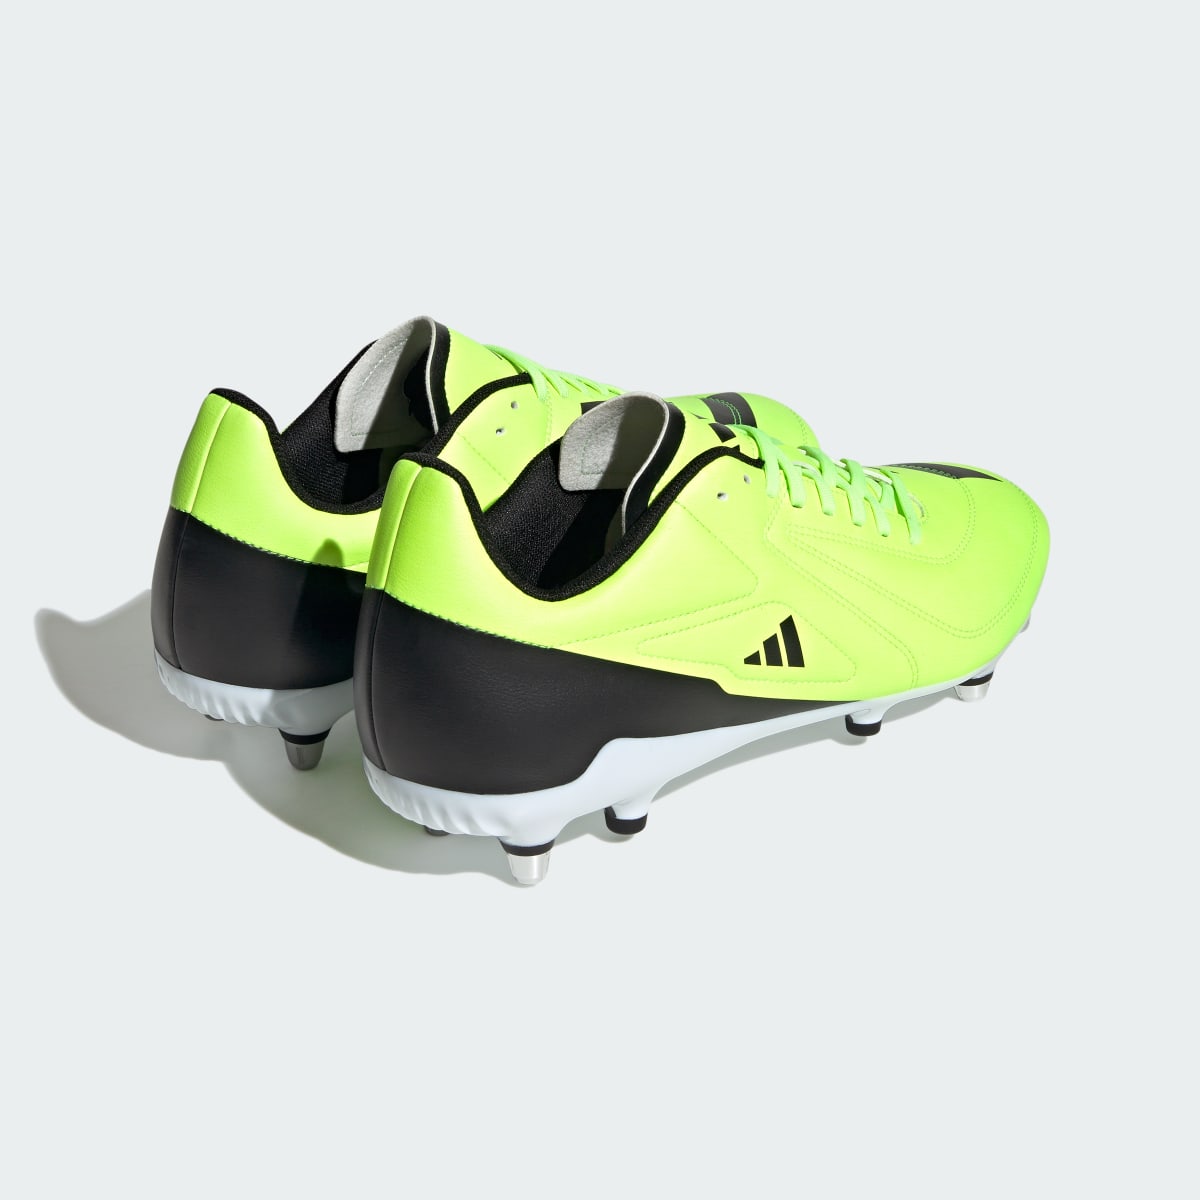 Adidas Buty RS15 Soft Ground Rugby. 9